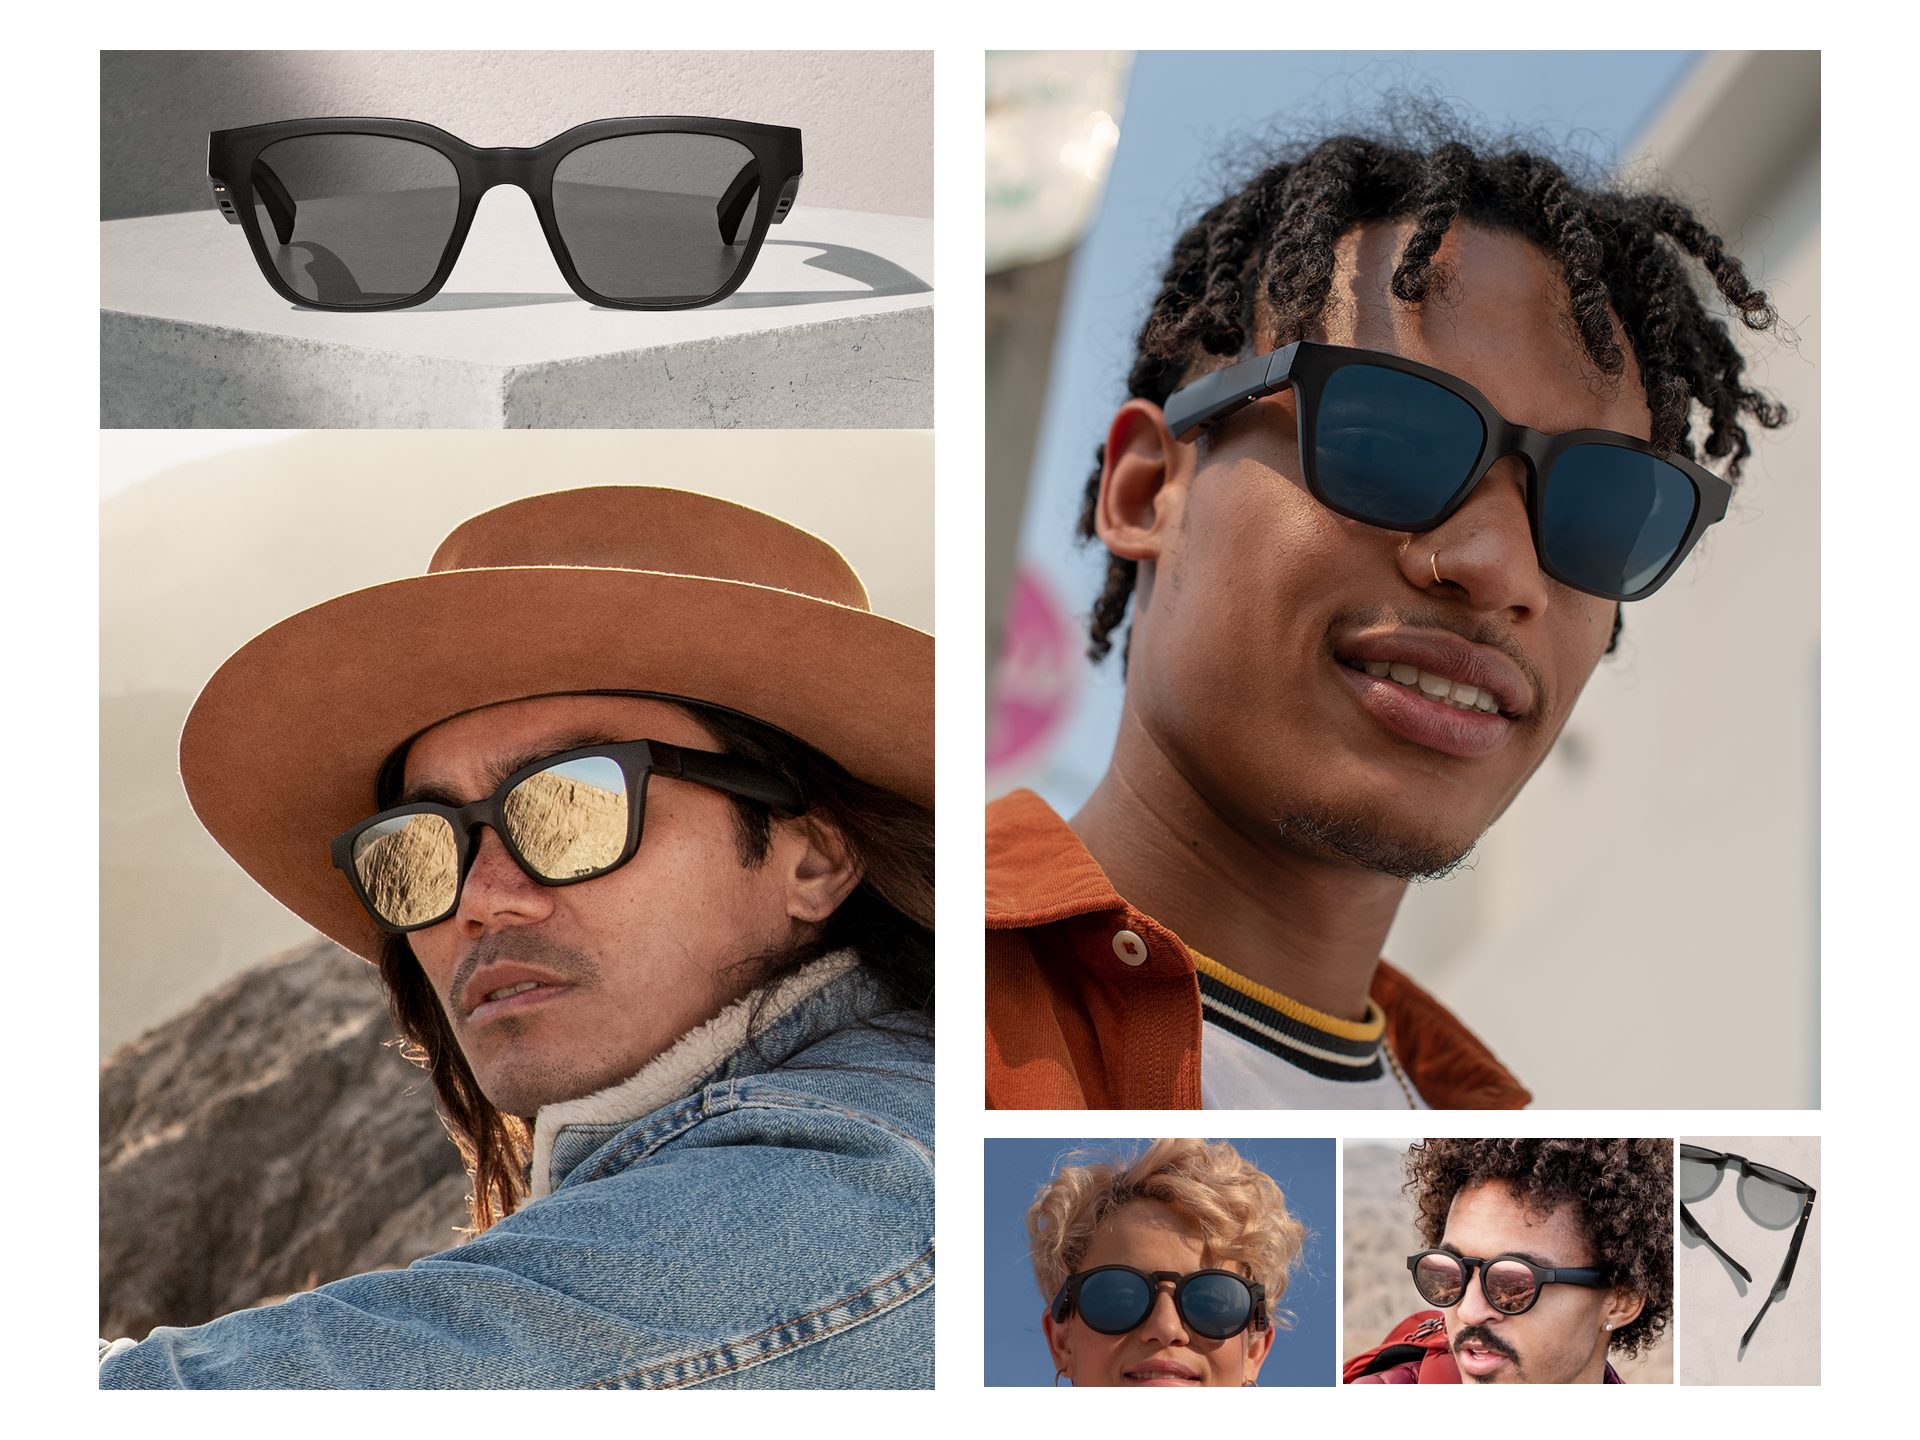 Bose Unveils Sunglasses That Include Speakers for Augmented Reality |  Architectural Digest